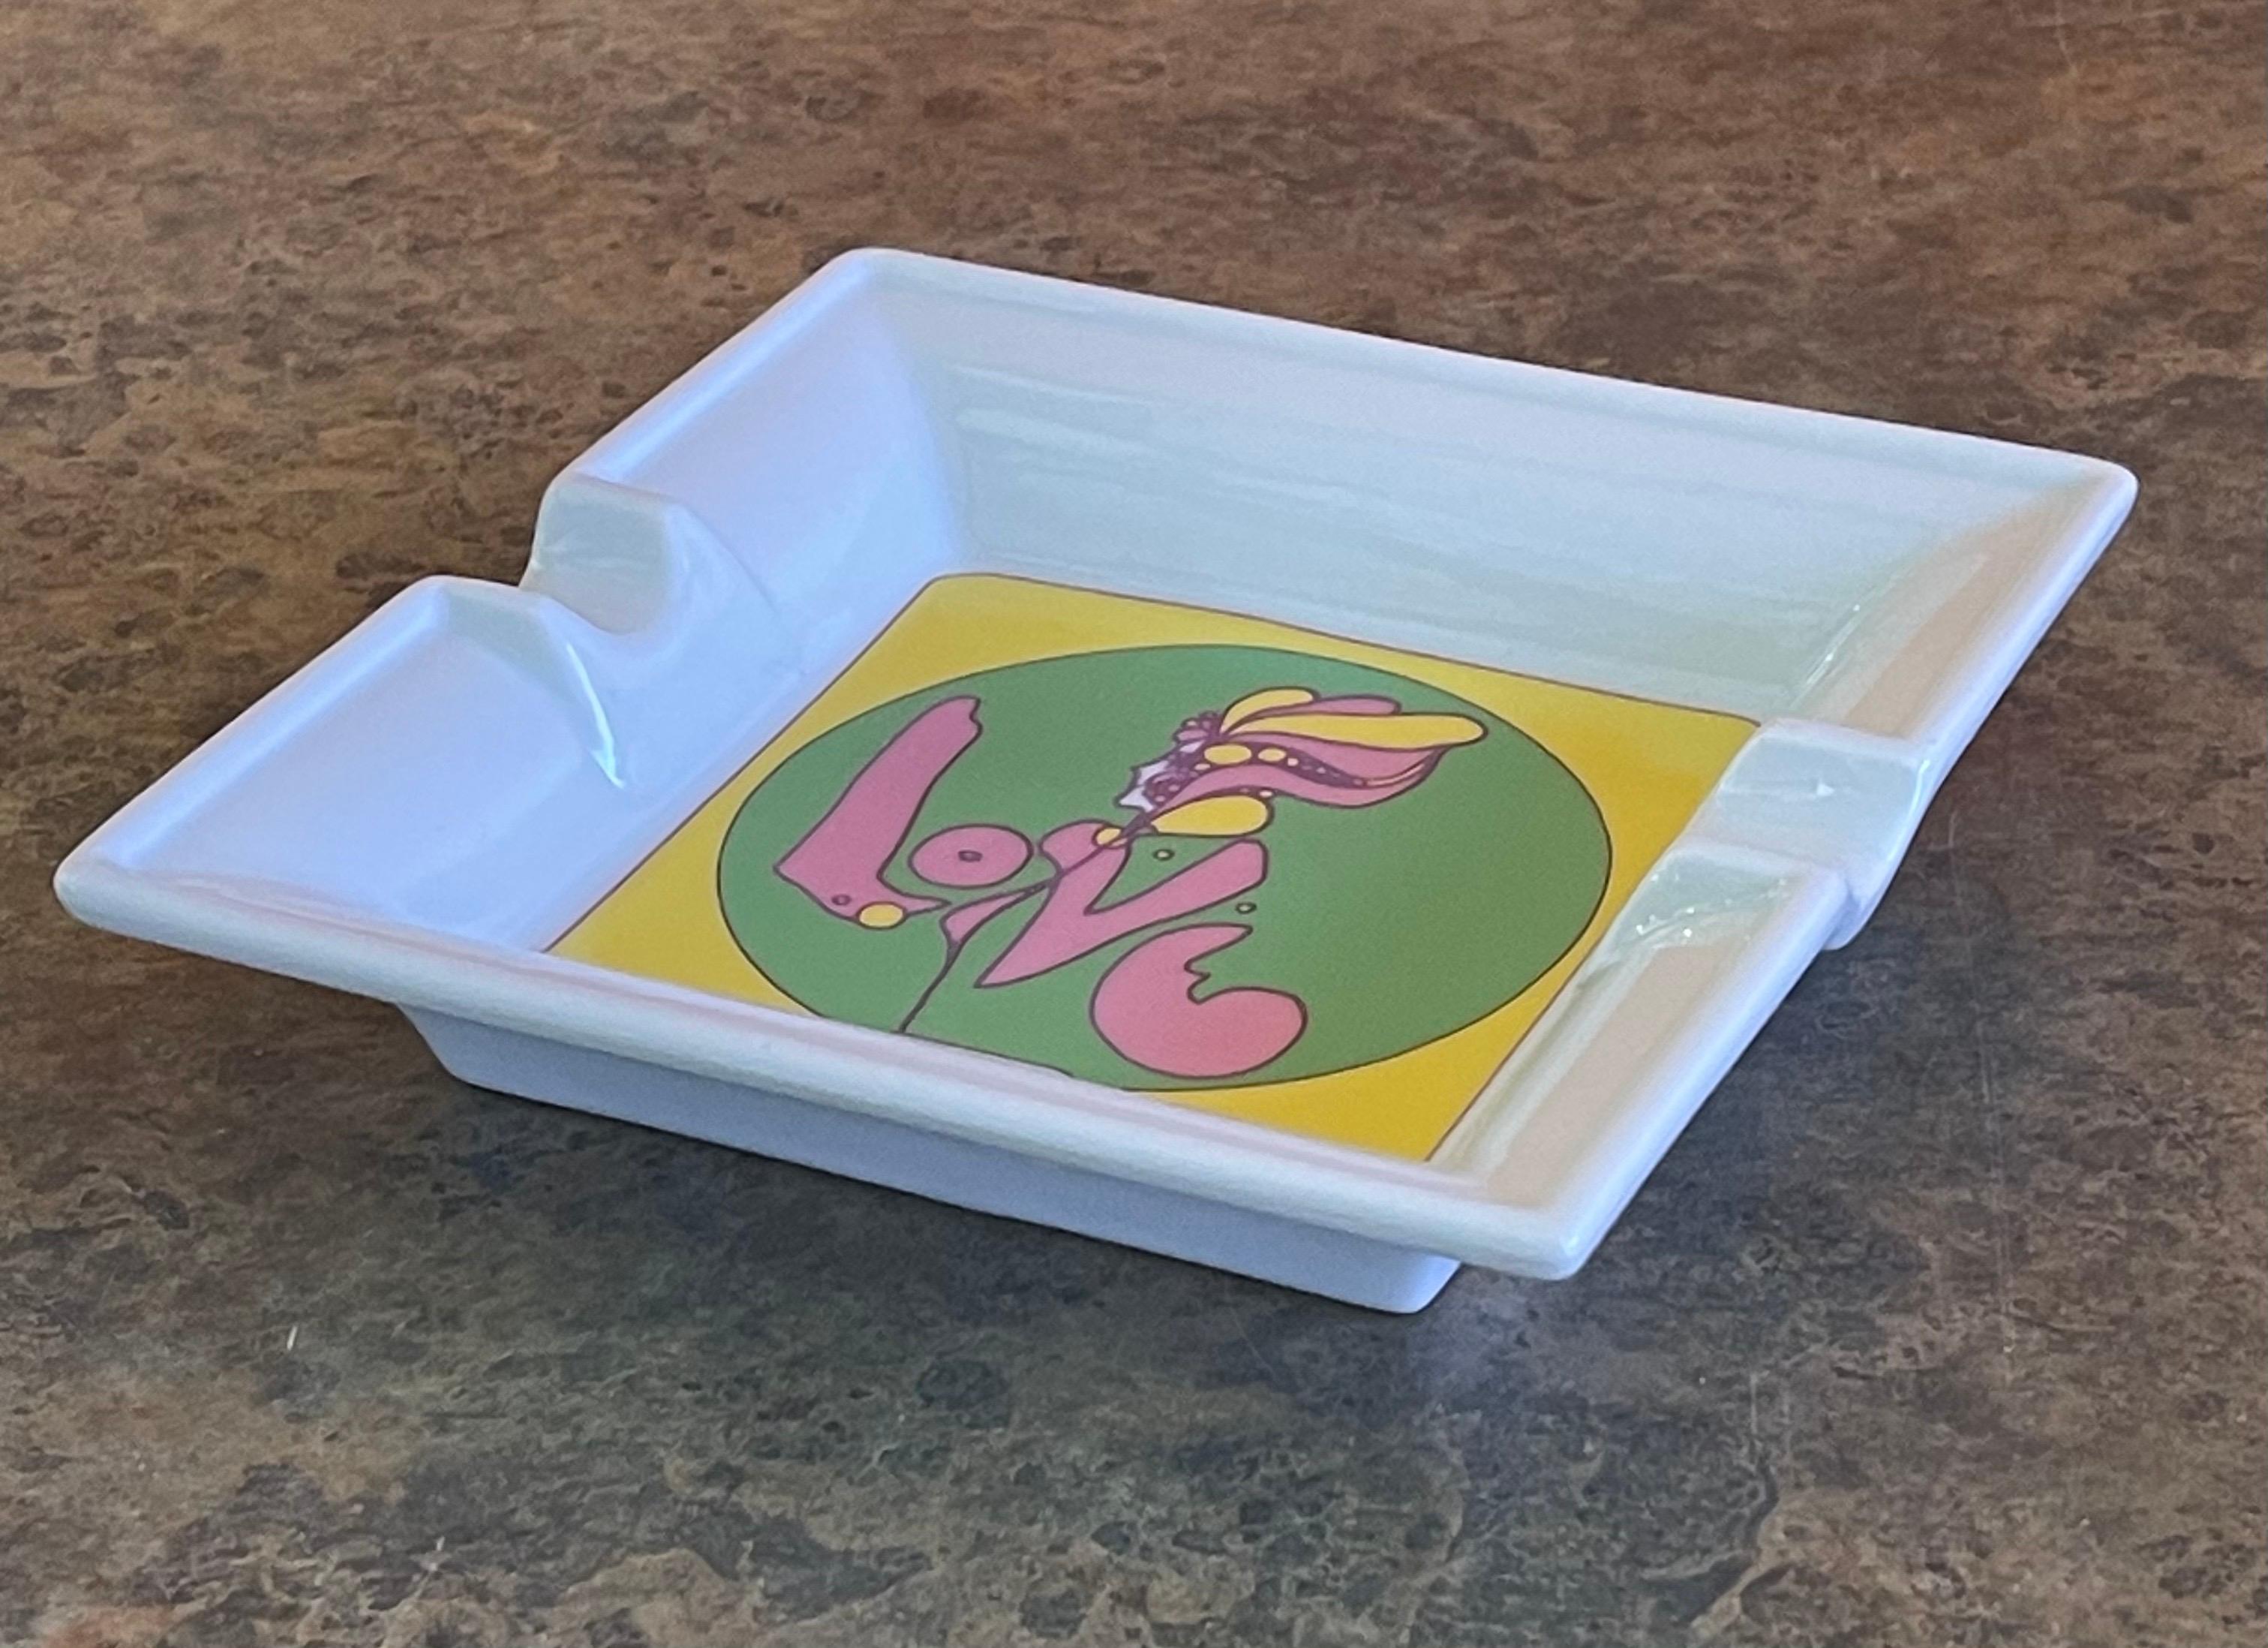 American Peter Max Pop Art Ceramic Ashtray by Iroquois For Sale